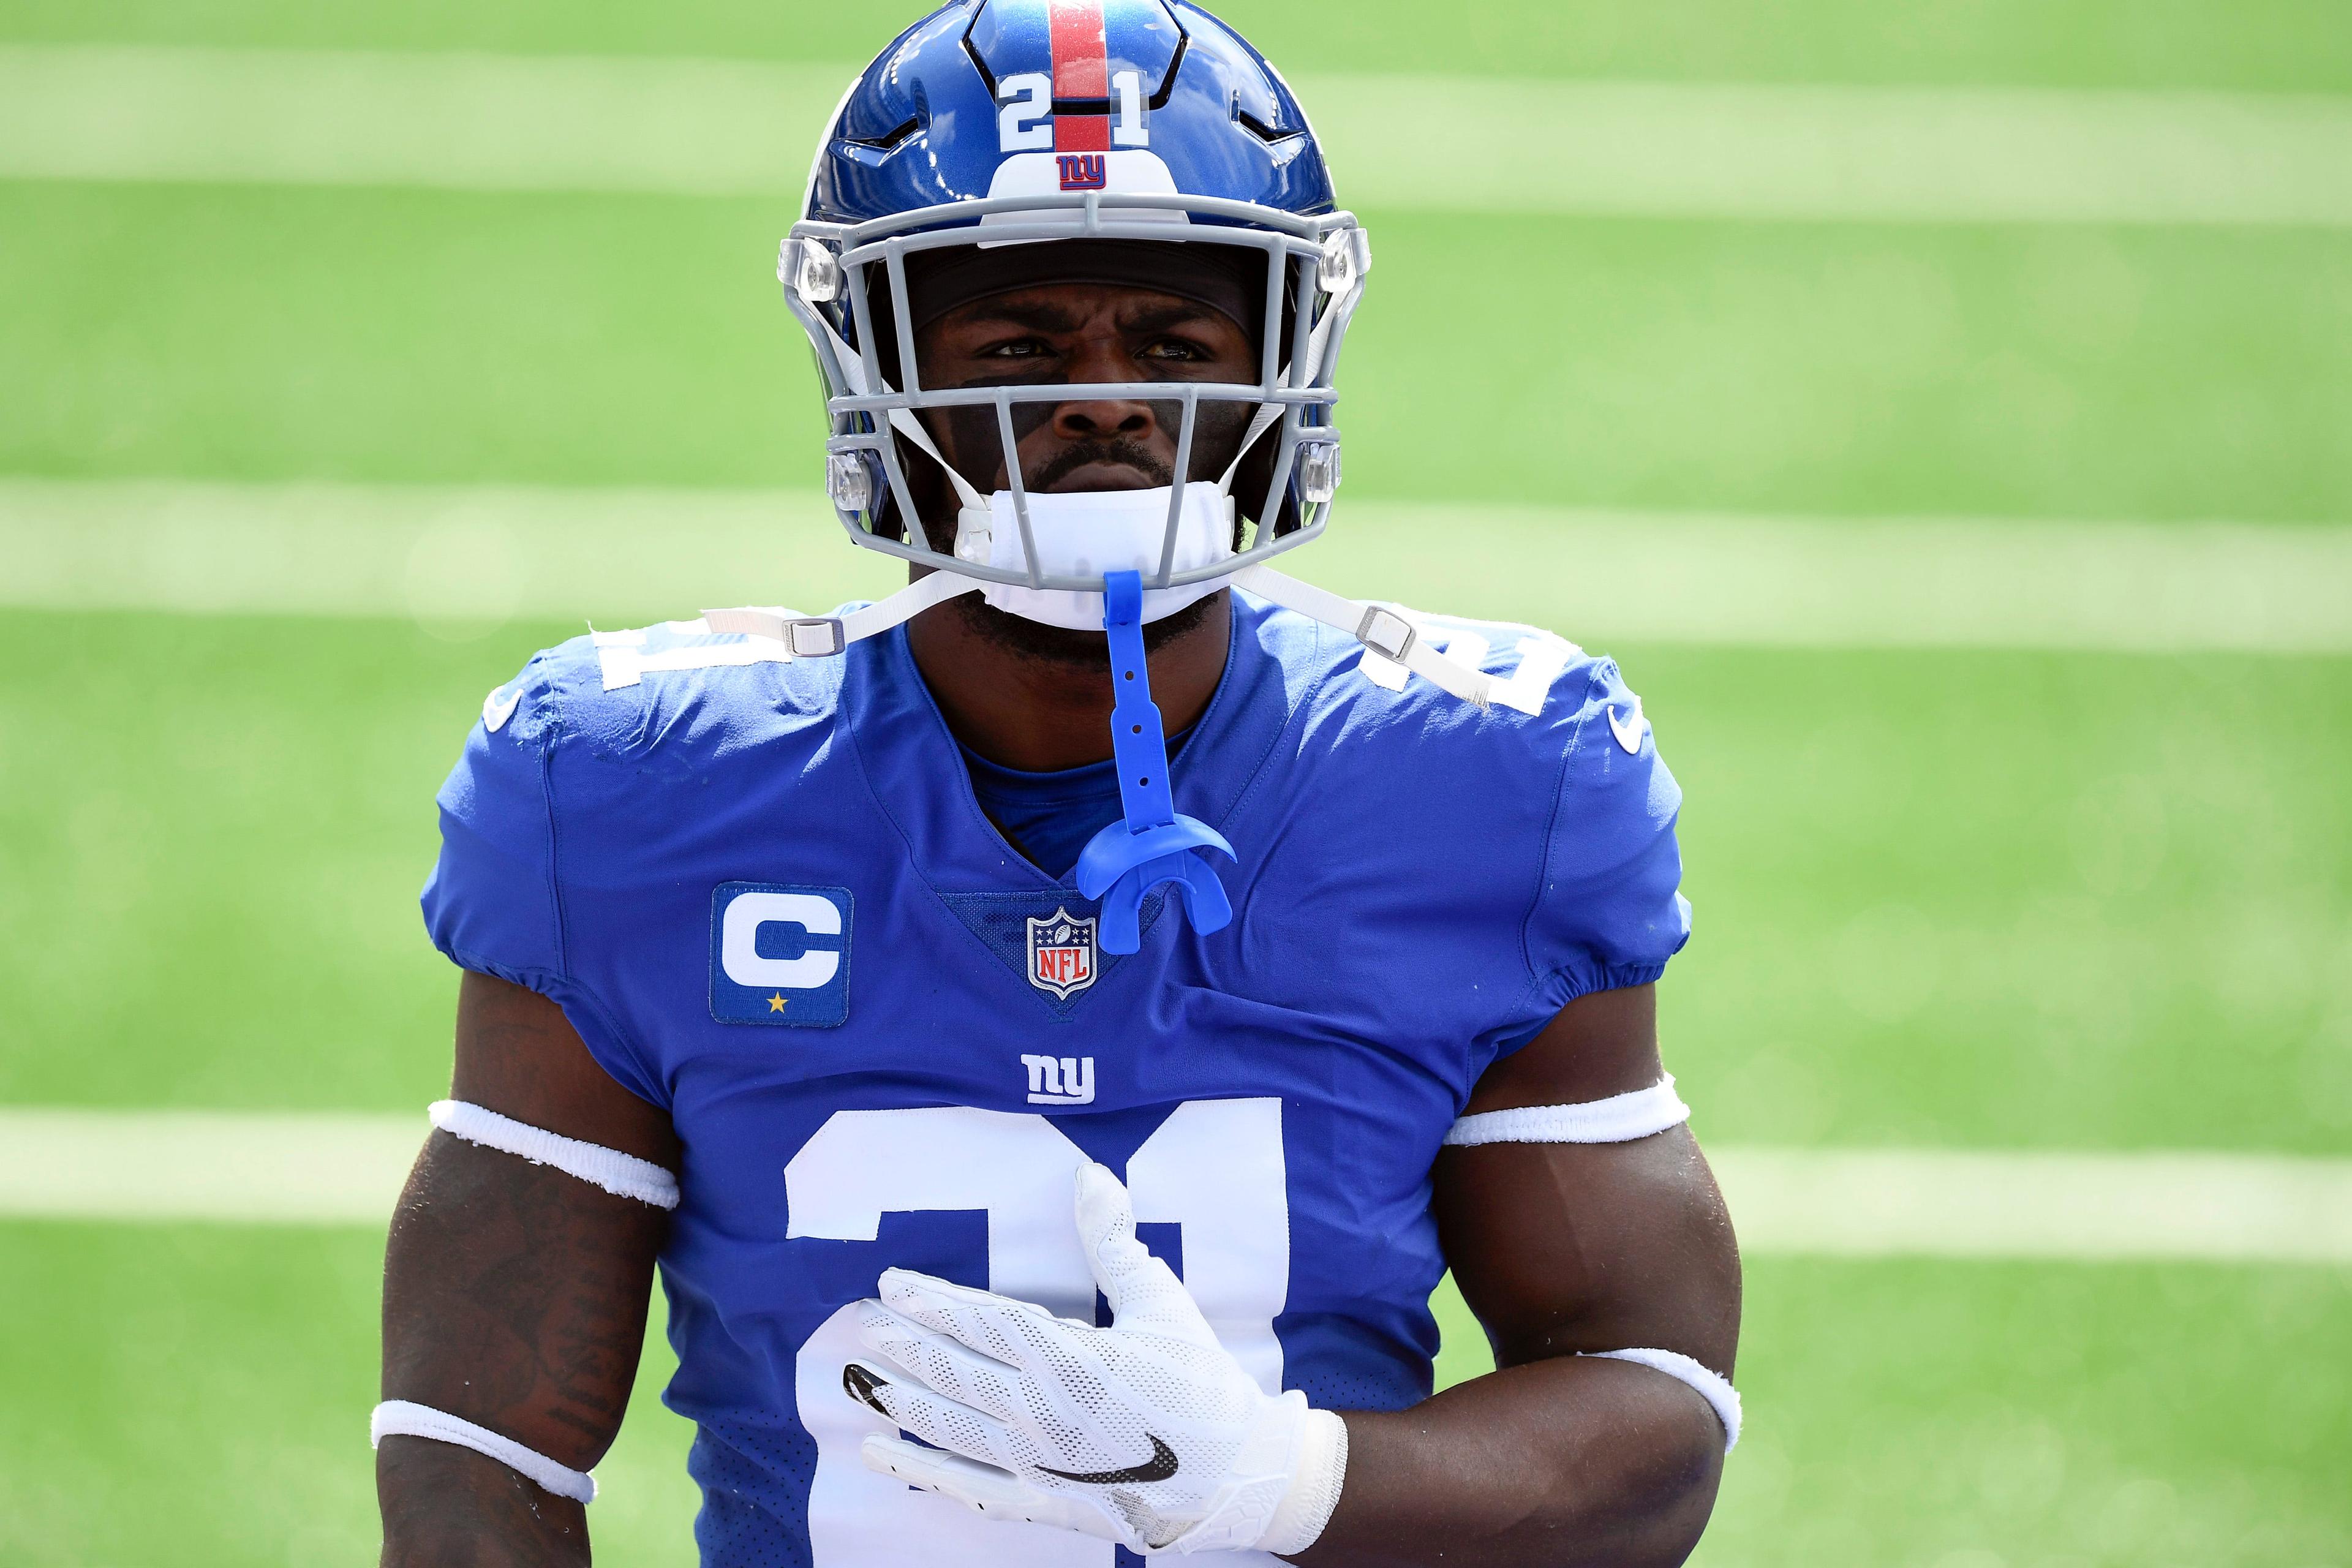 New York Giants safety Jabrill Peppers (21) on the field for warmups before facing the San Francisco 49ers in an NFL game at MetLife Stadium on Sunday, Sept. 27, 2020, in East Rutherford. Giants 49ers / © Danielle Parhizkaran/NorthJersey.com via Imagn Content Services, LLC